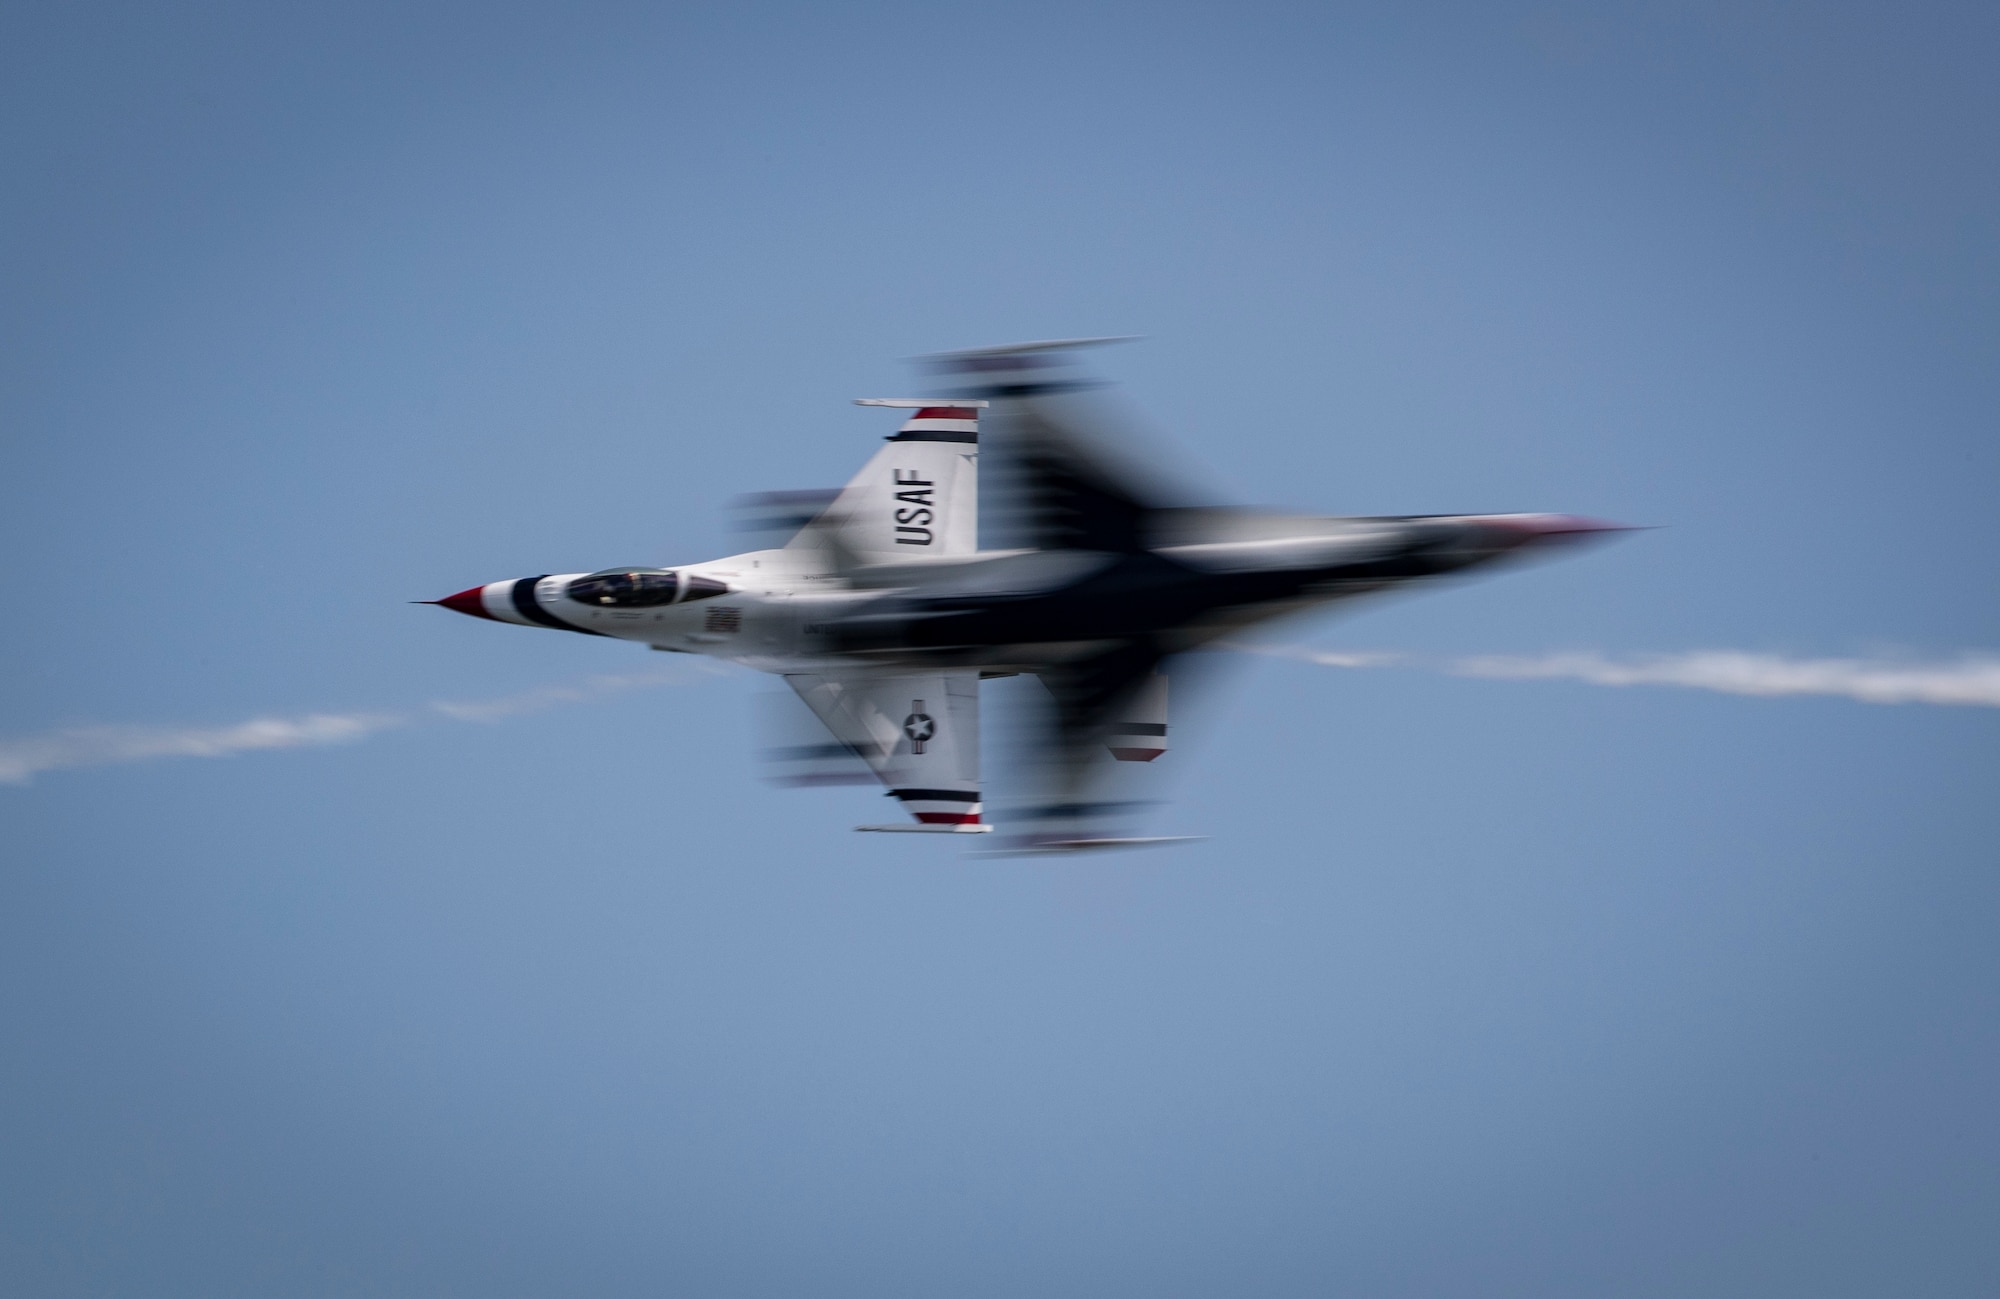 F-16C Fighting Falcons from the U.S. Air Force Thunderbirds demonstration team perform during the Thunder over the Boardwalk Air Show in Atlantic City, N.J., Aug. 22, 2018. (U.S. Air National Guard photo by Master Sgt. Matt Hecht)